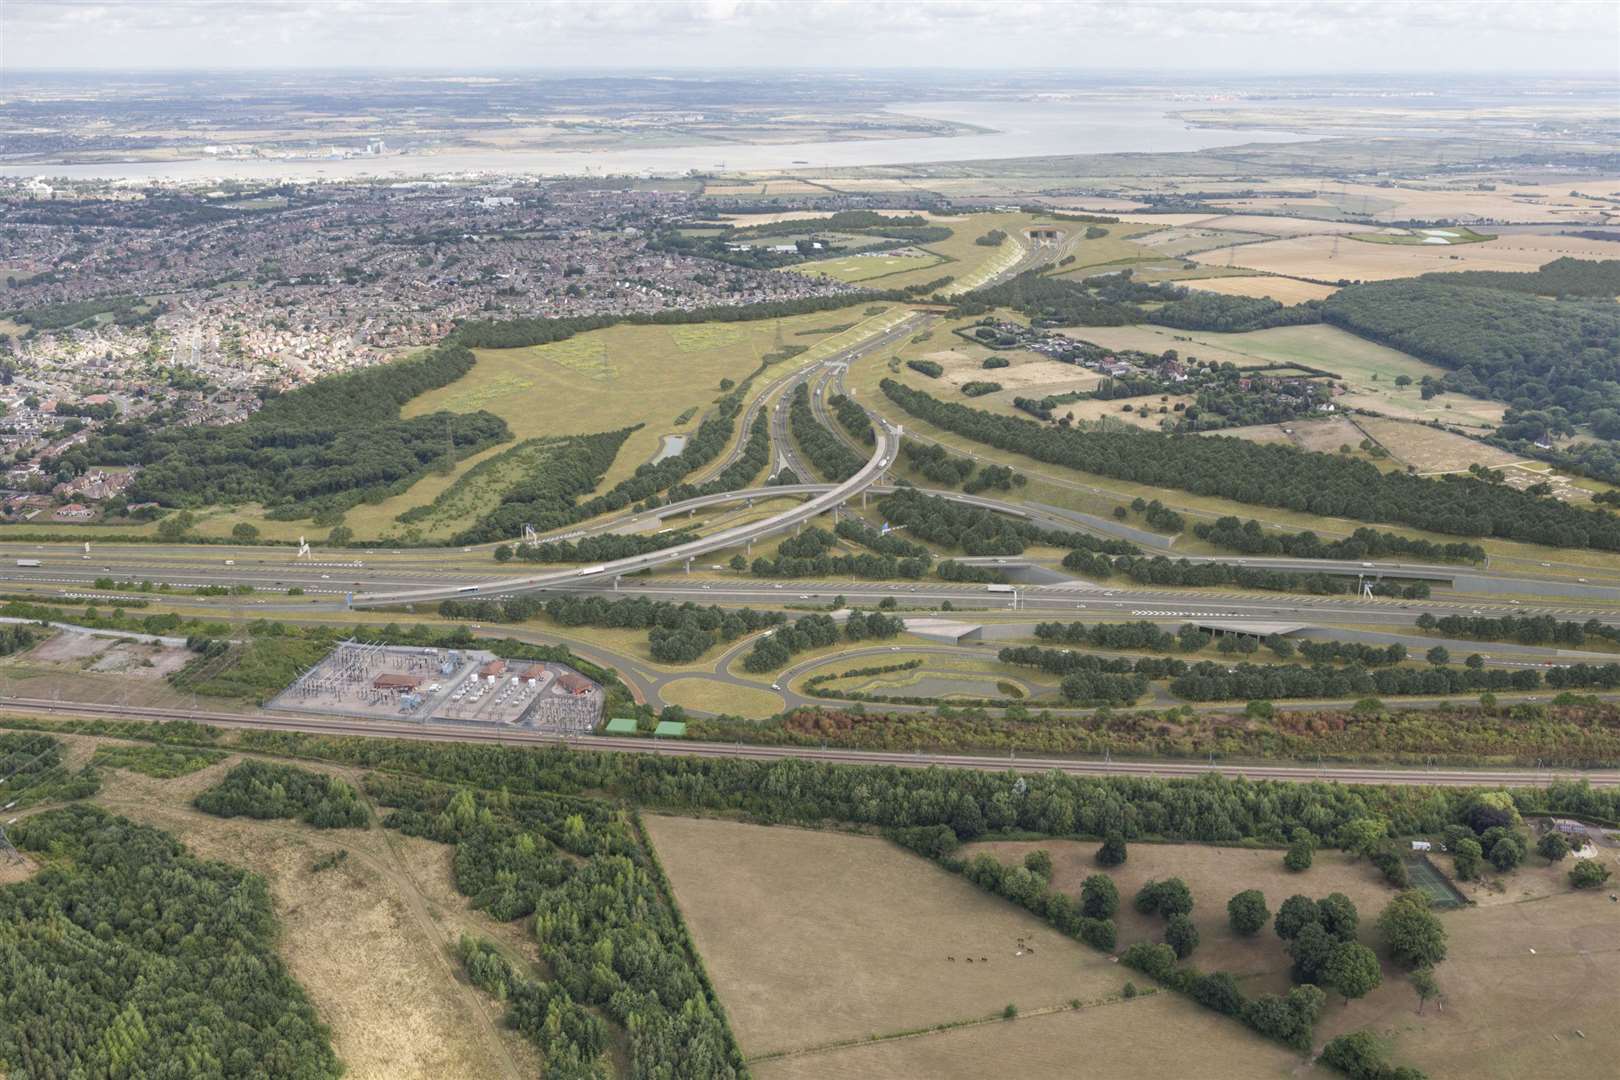 Mr Palmer said further development and infrastructure would be needed in addition to the Lower Thames Crossing and that it will "buy us time". The proposed view looking north from the A2 to the Lower Thames Crossing. Picture: Highways England